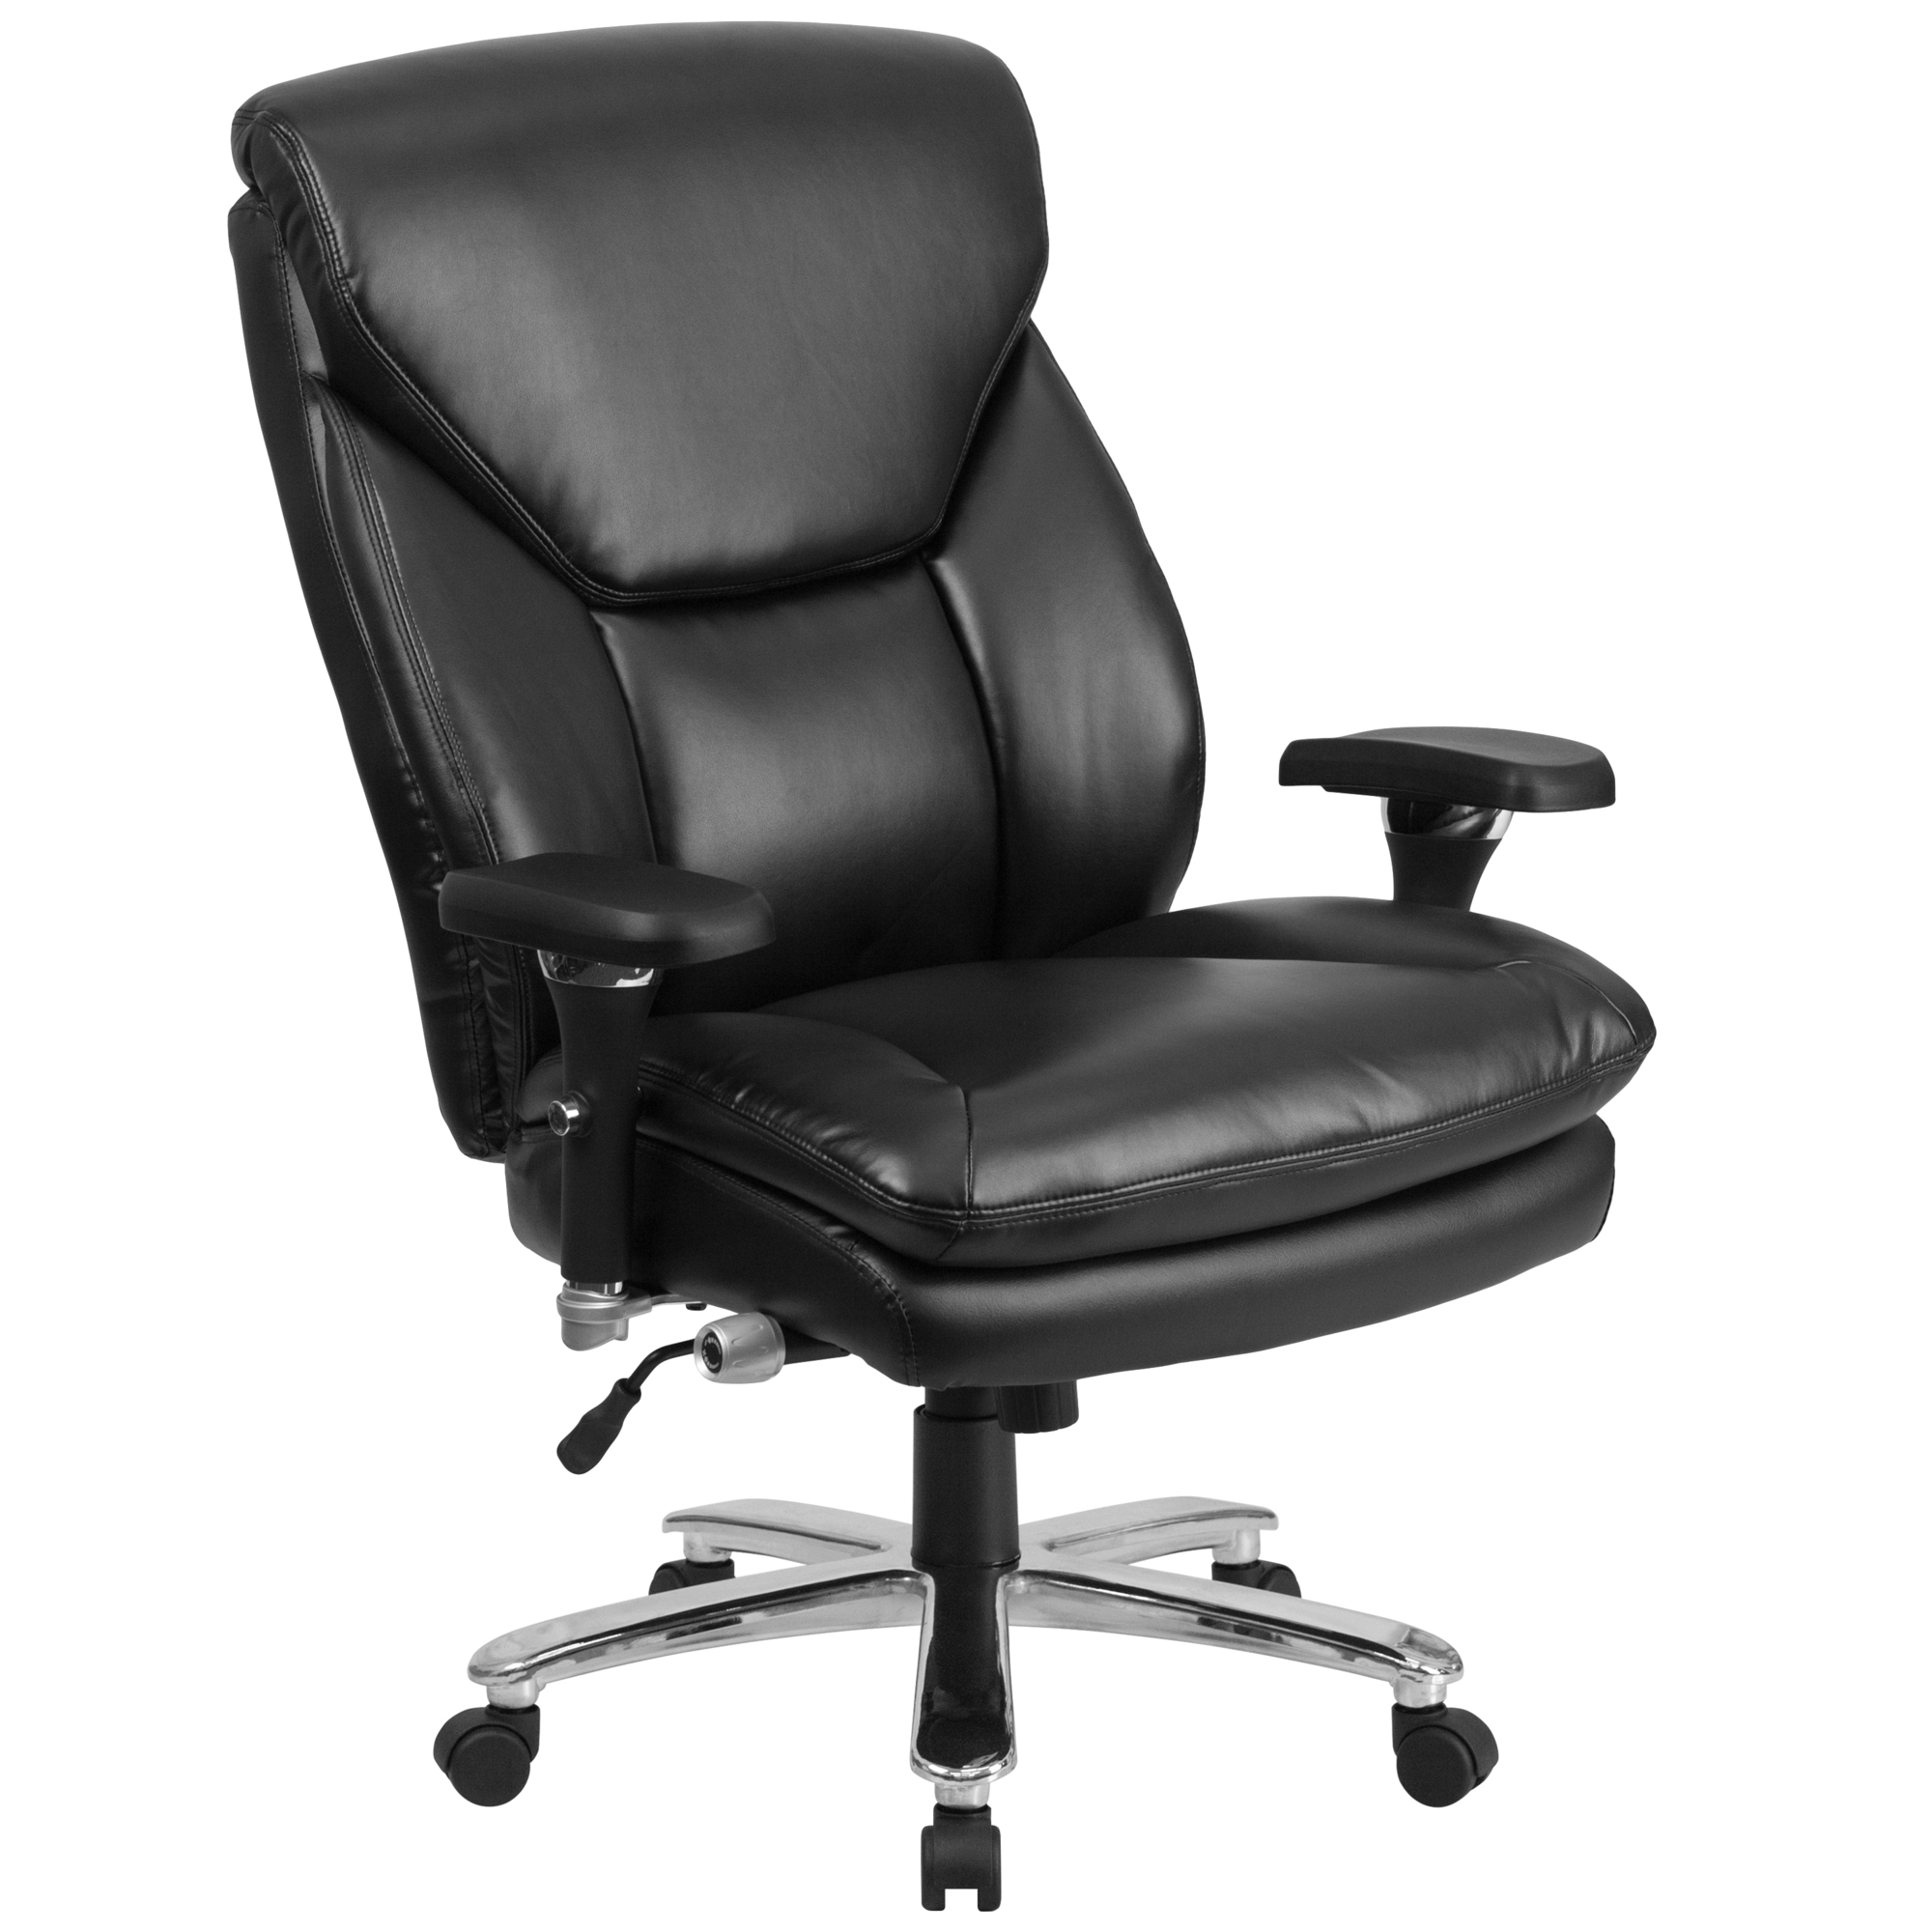 Flash Furniture, 400 lb. Rated High Back Black LeatherSoft Chair, Primary Color Black, Included (qty.) 1, Model GO2085LEA